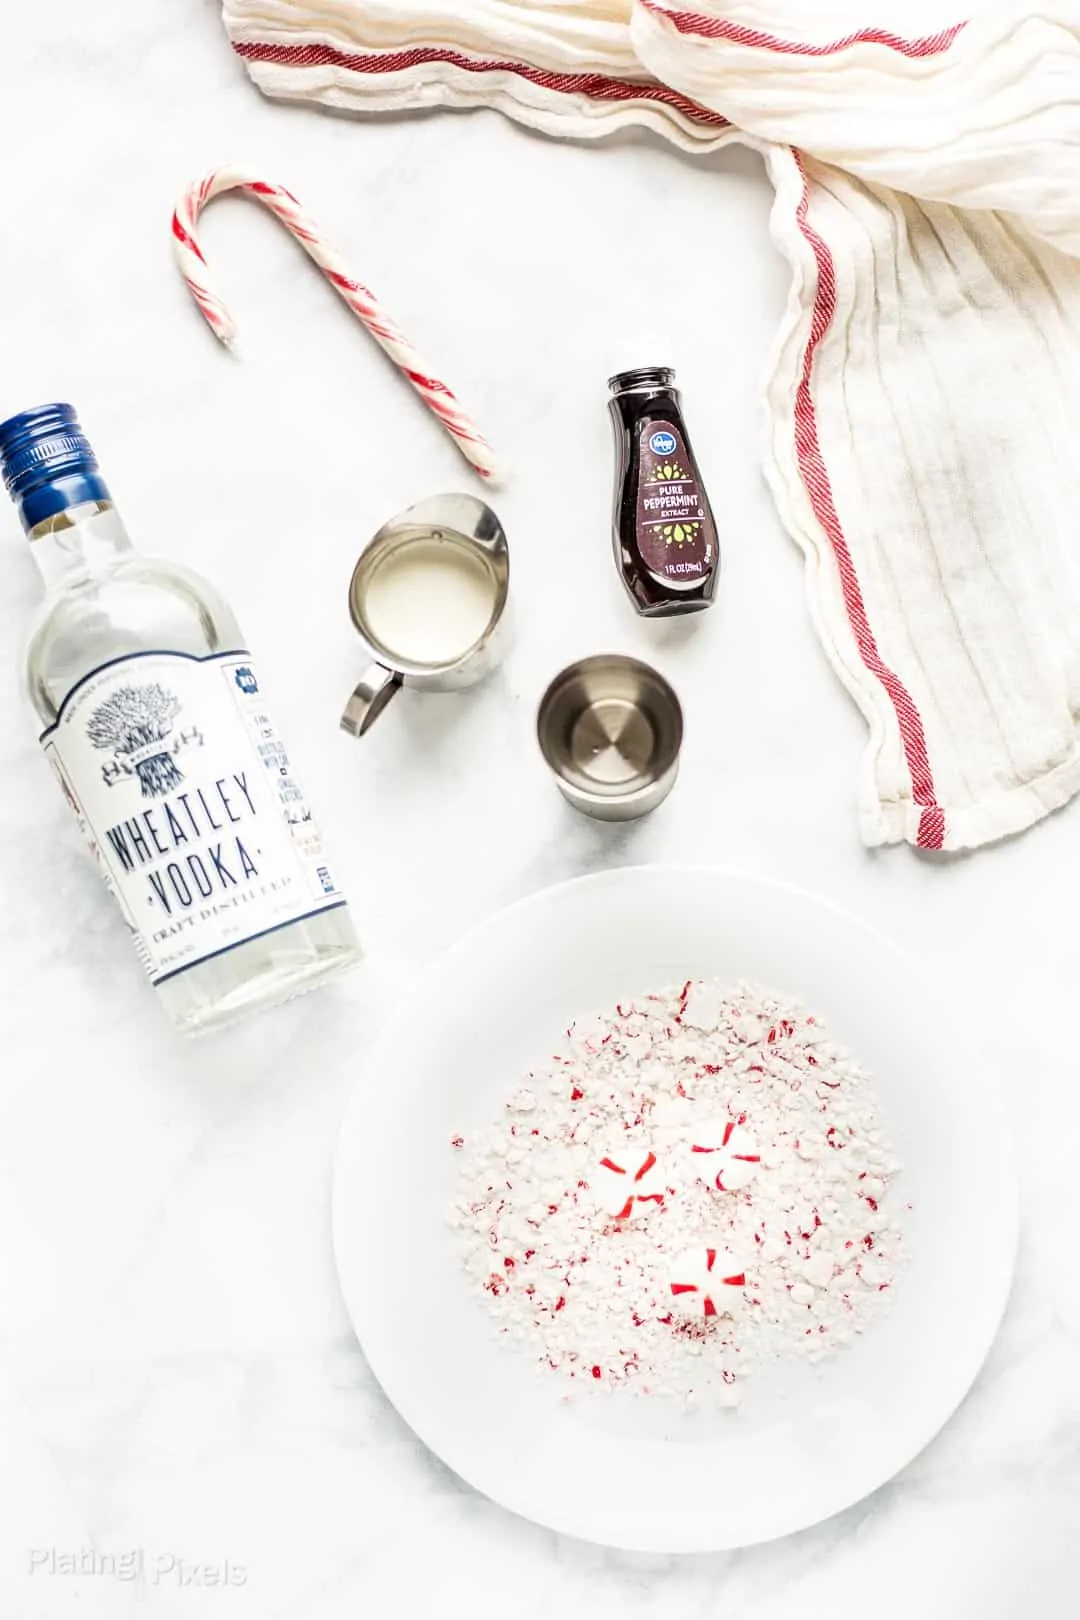 Ingredients to make a White Chocolate Peppermint Martini prepared on a counter